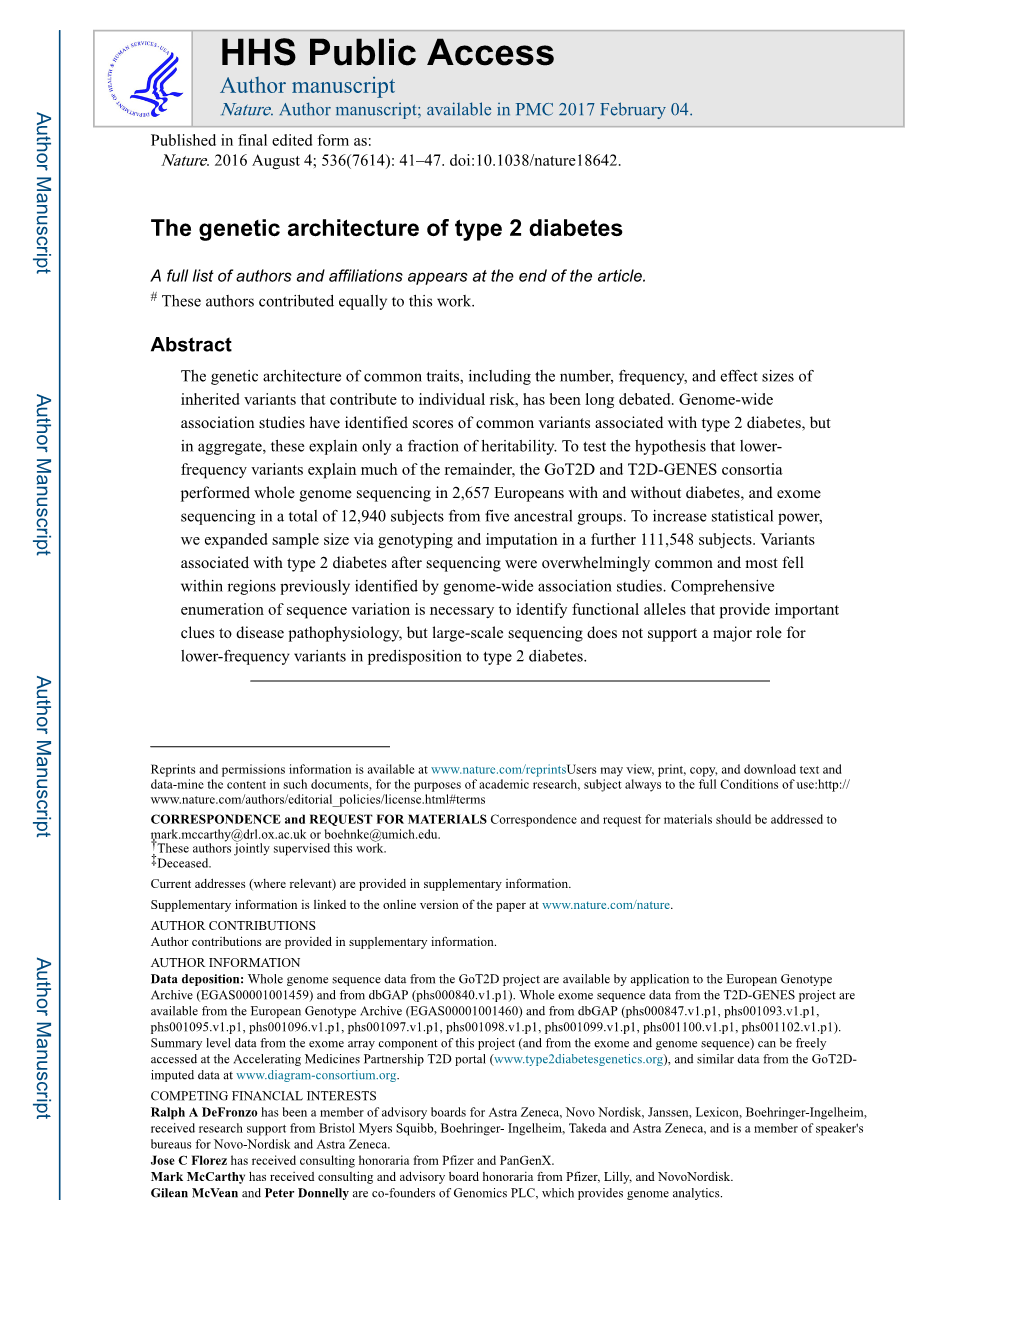 The Genetic Architecture of Type 2 Diabetes